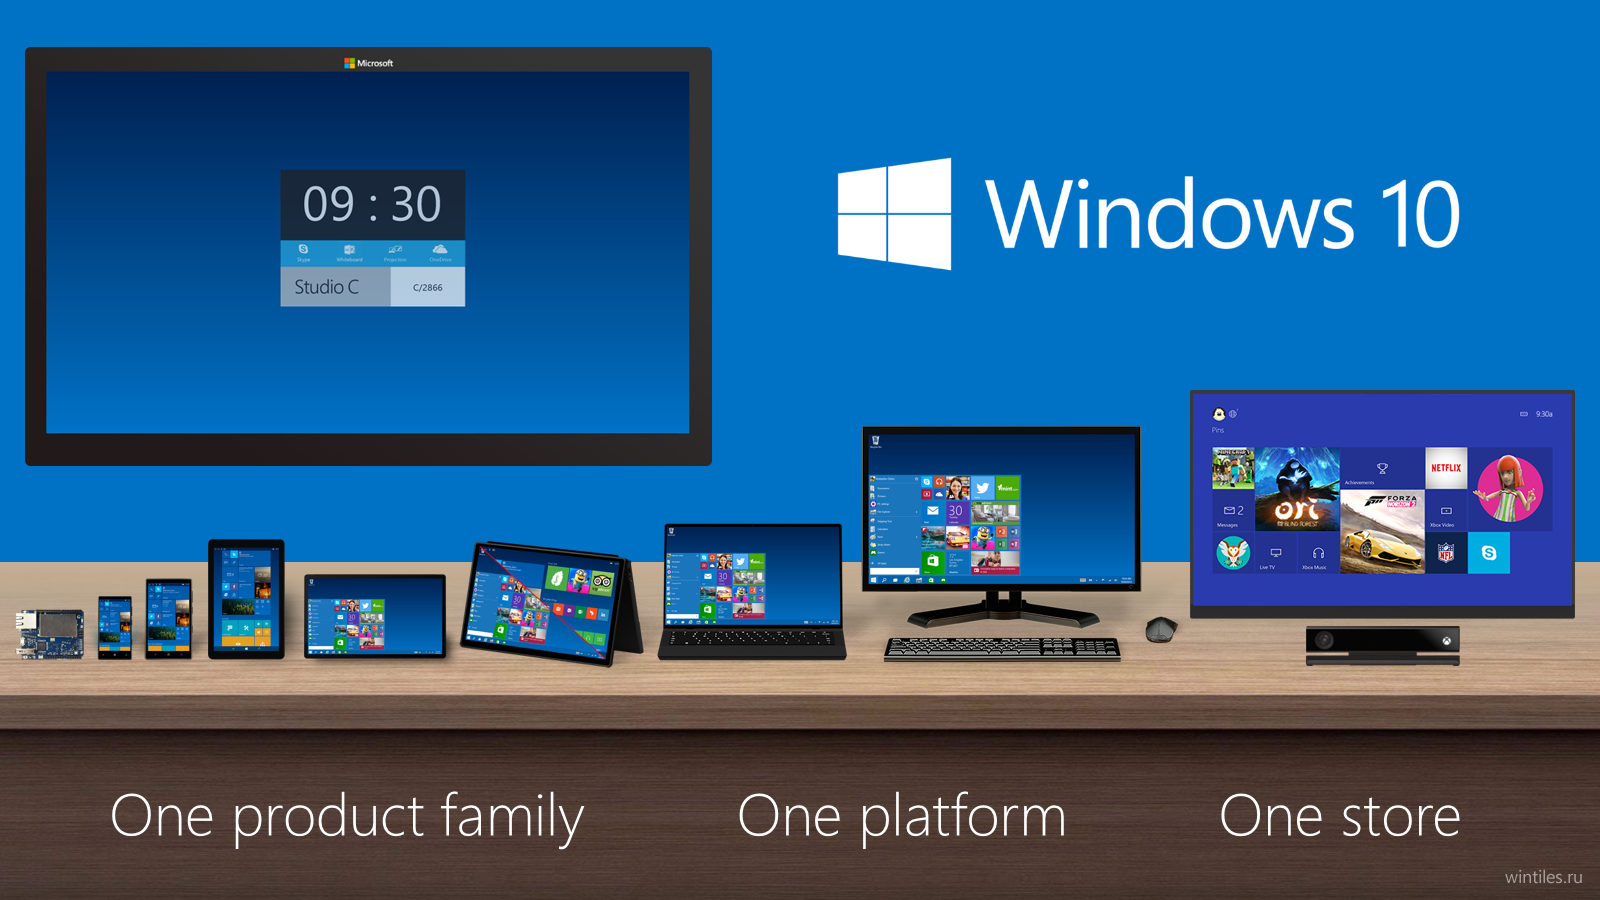 1412150090_windows_product_family_9-30-event.png